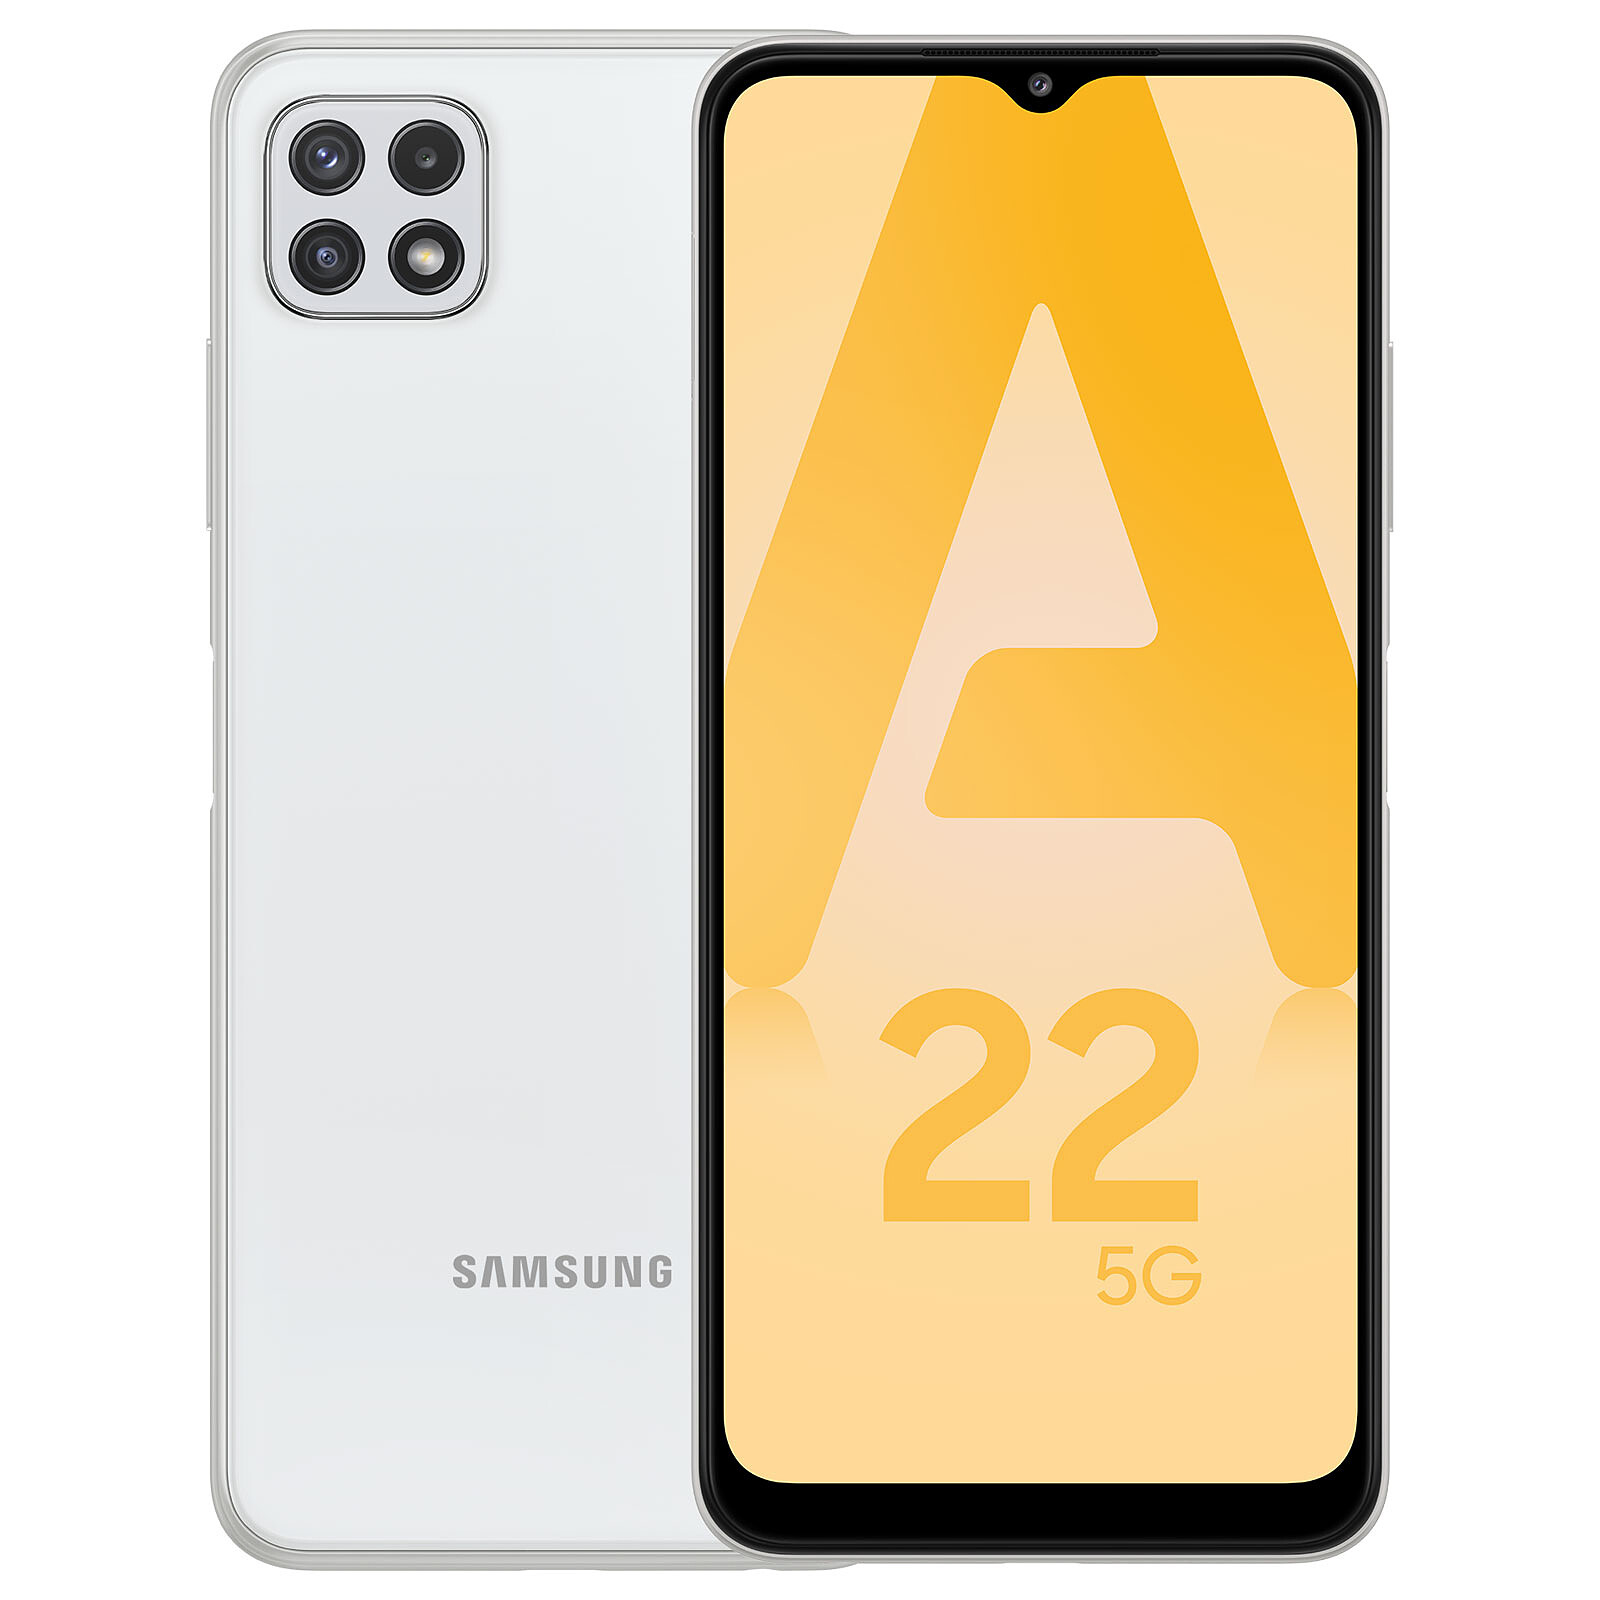 Samsung Galaxy A22 5G White - Mobile phone & smartphone - LDLC 3